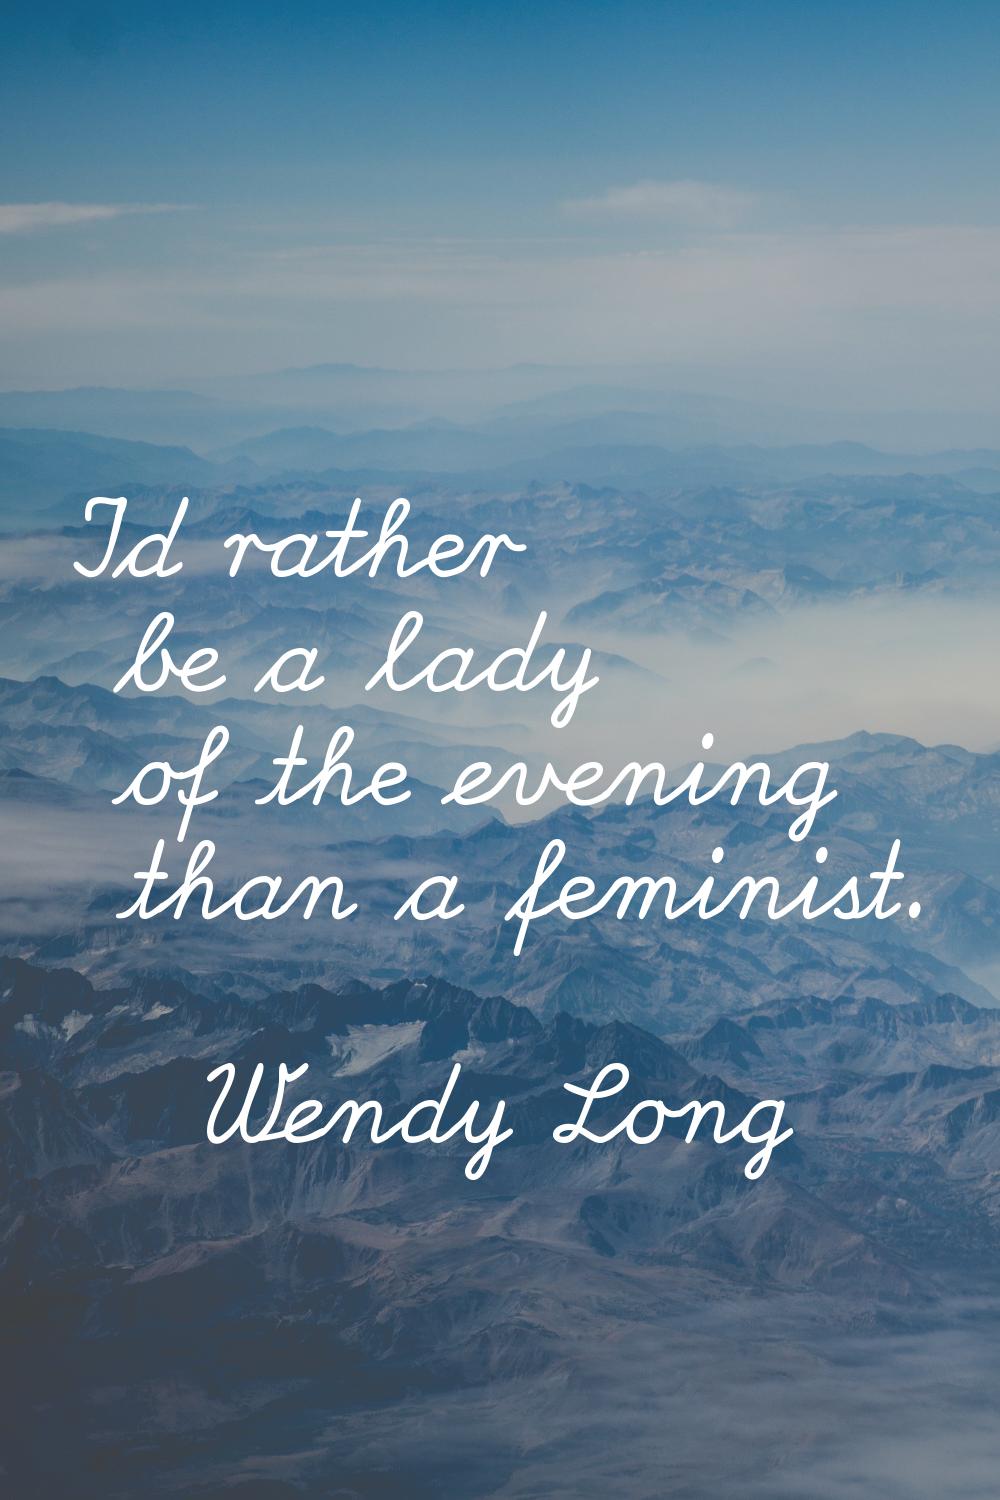 I'd rather be a lady of the evening than a feminist.